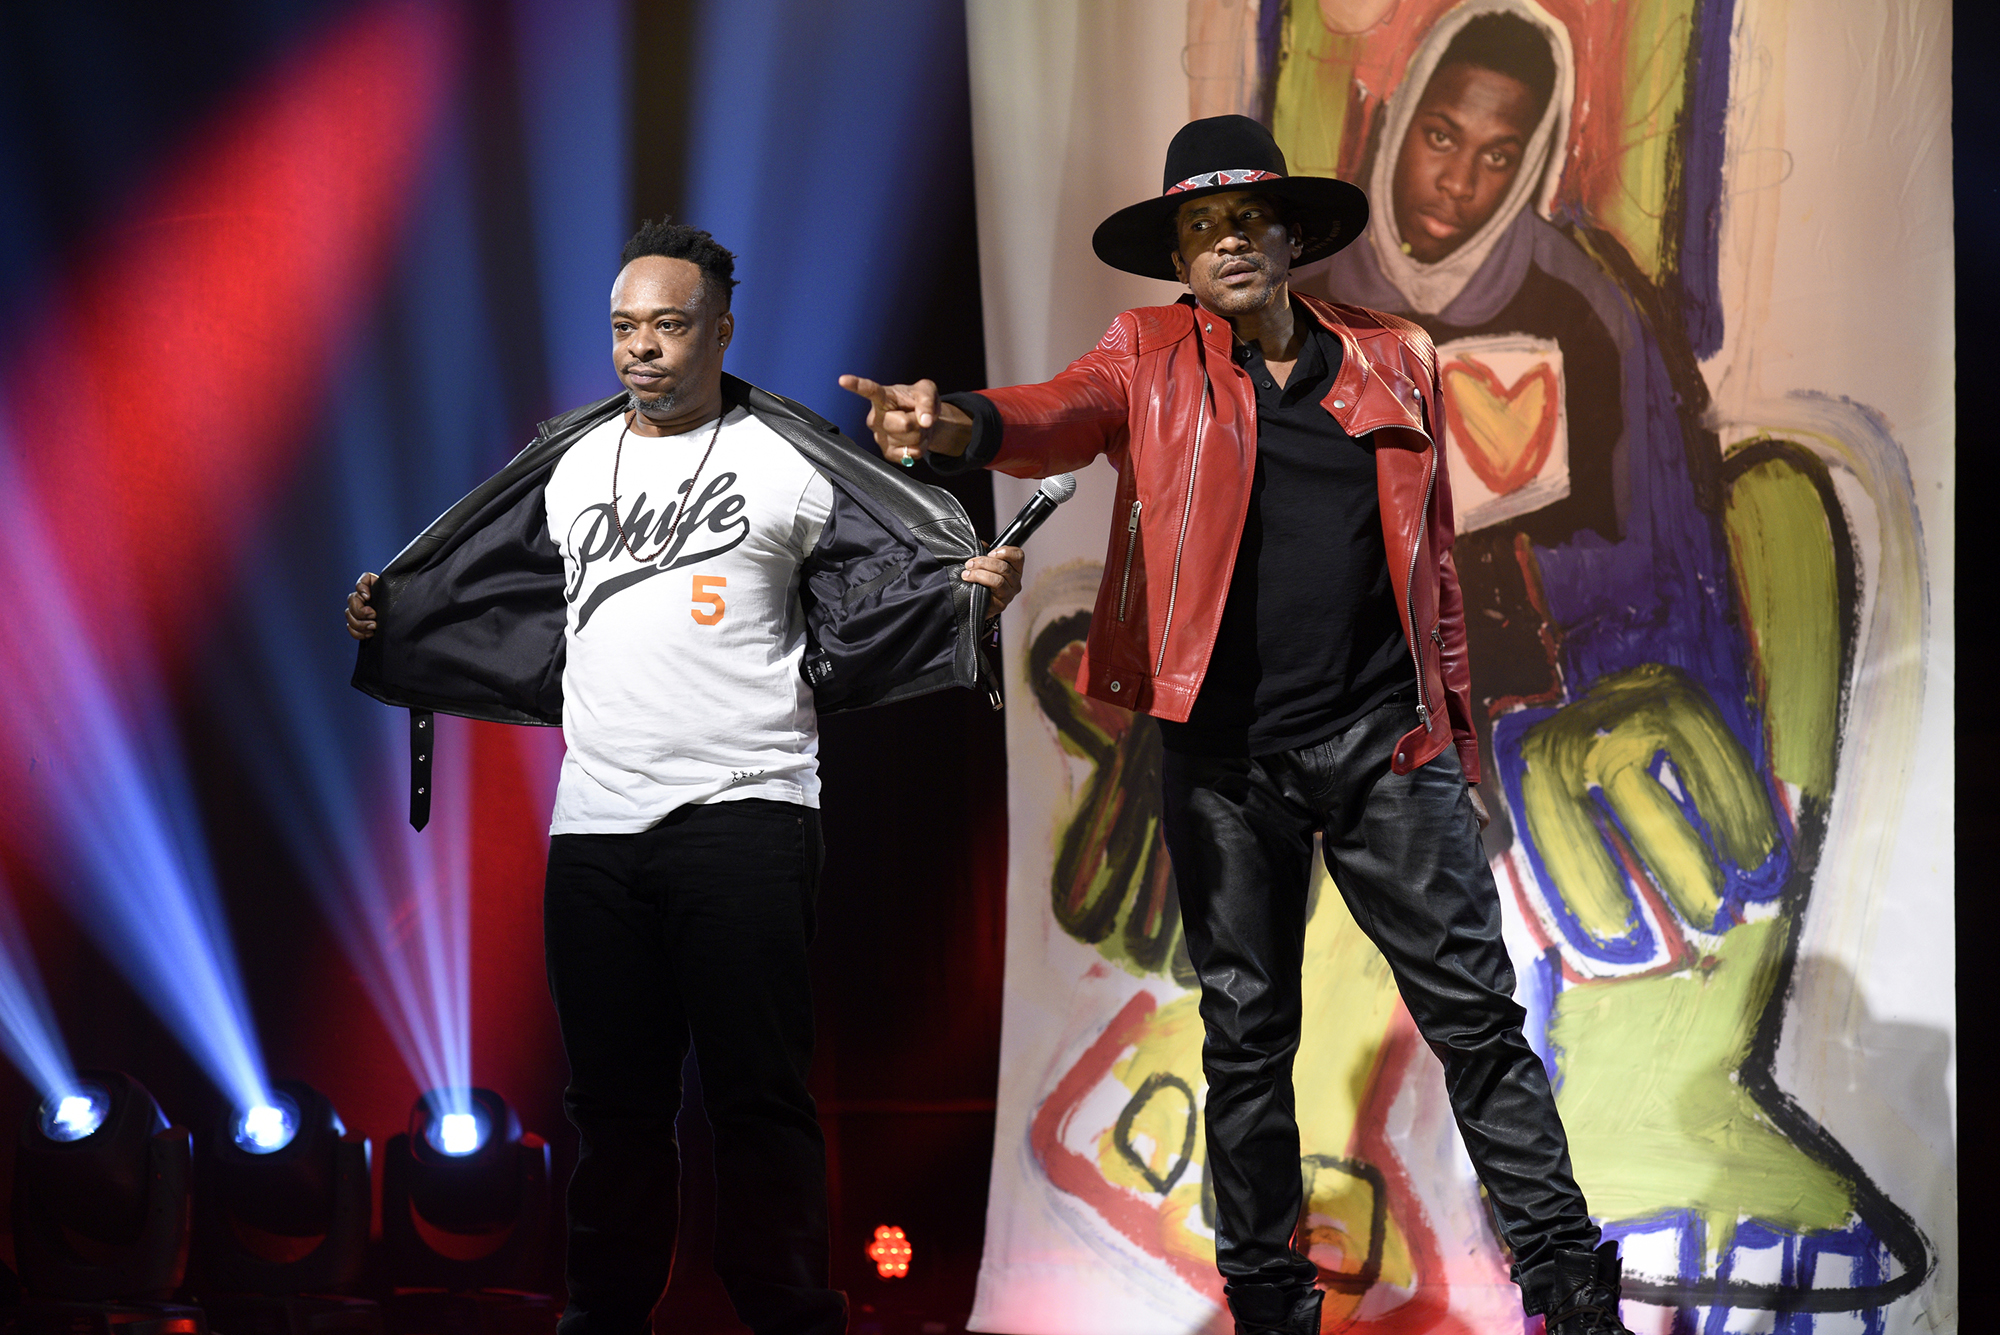 Jarobi White and Q-Tip of musical guest A Tribe Called Quest perform on November 12, 2016 -- (Photo by: Will Heath/NBC/NBCU Photo Bank via Getty Images) (NBC&mdash;NBCU Photo Bank via Getty Images)